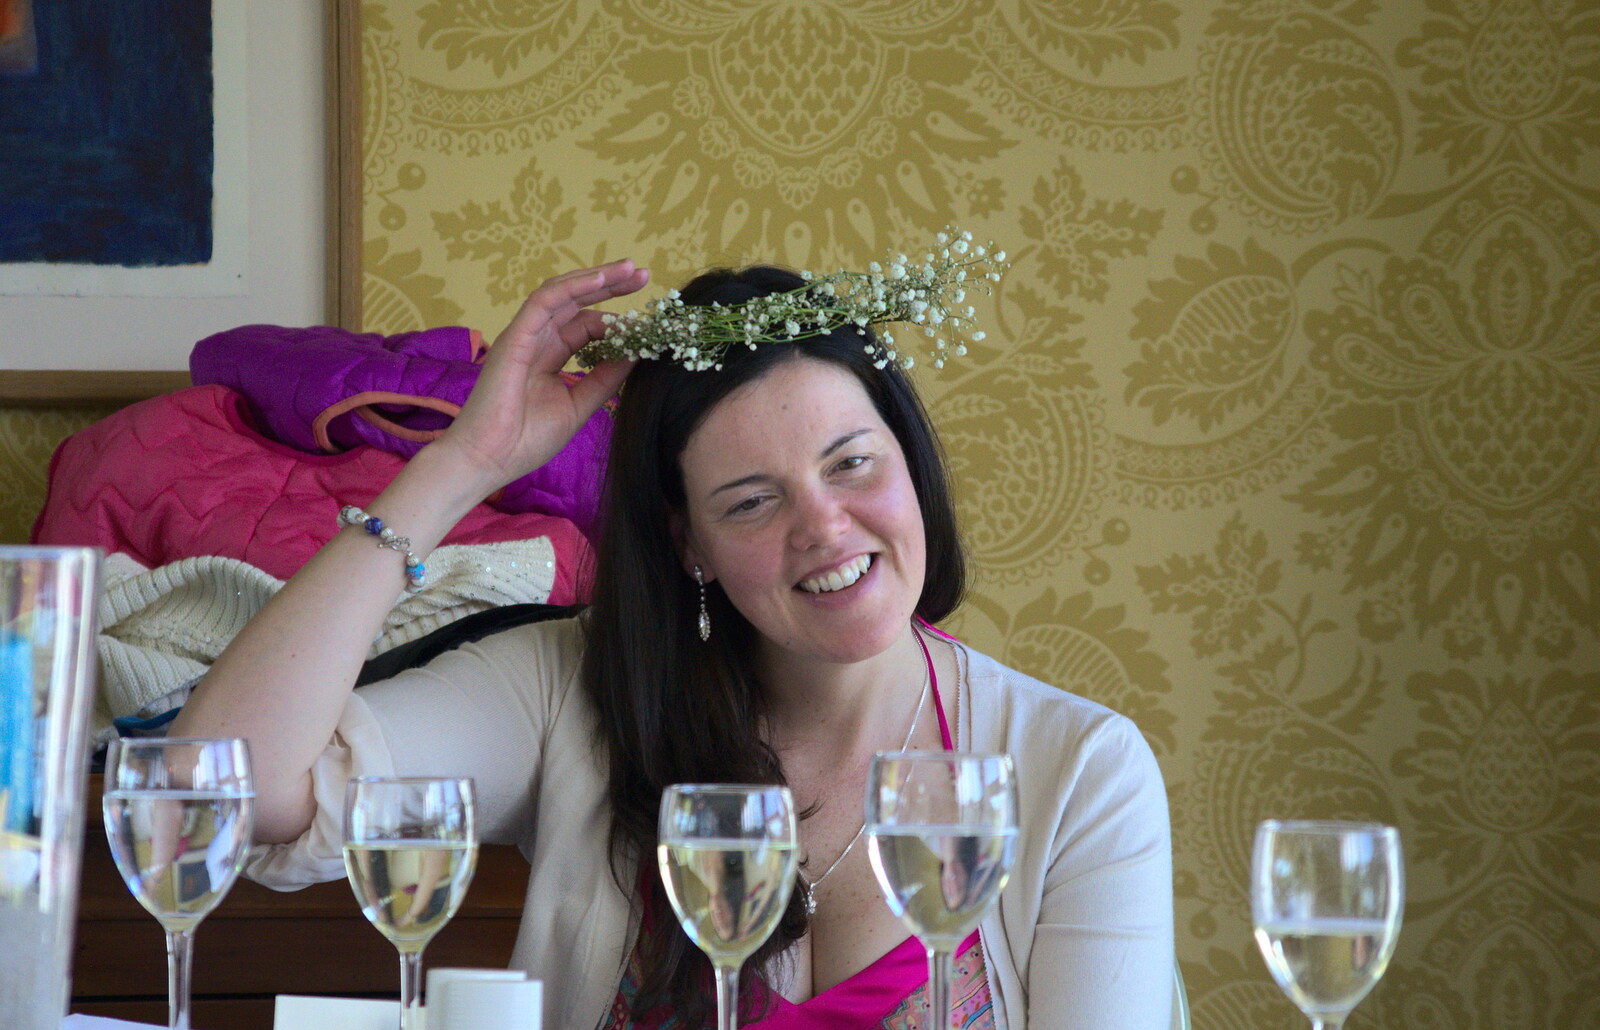 Trying on Lua's flower-crown for size from James and Haryanna's Wedding, Grand Canal Dock, Dublin - 15th April 2015